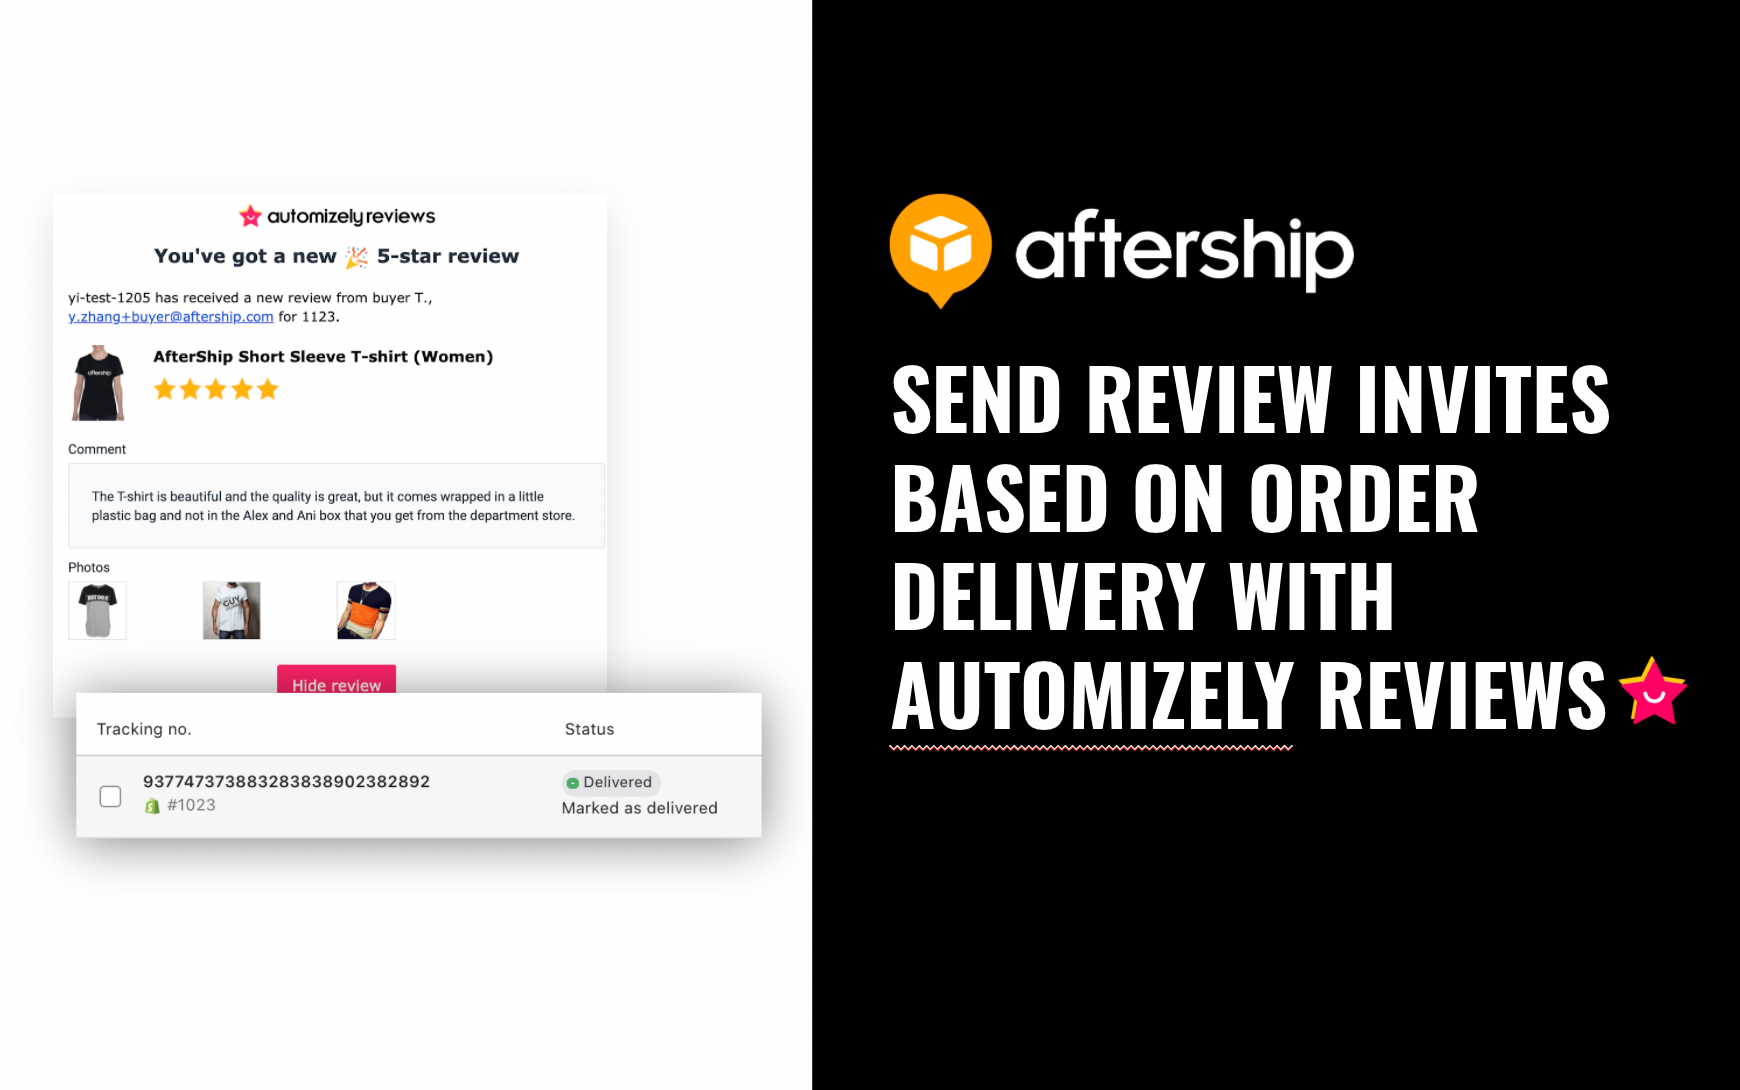 Push review request emails automatically after delivering orders successfully